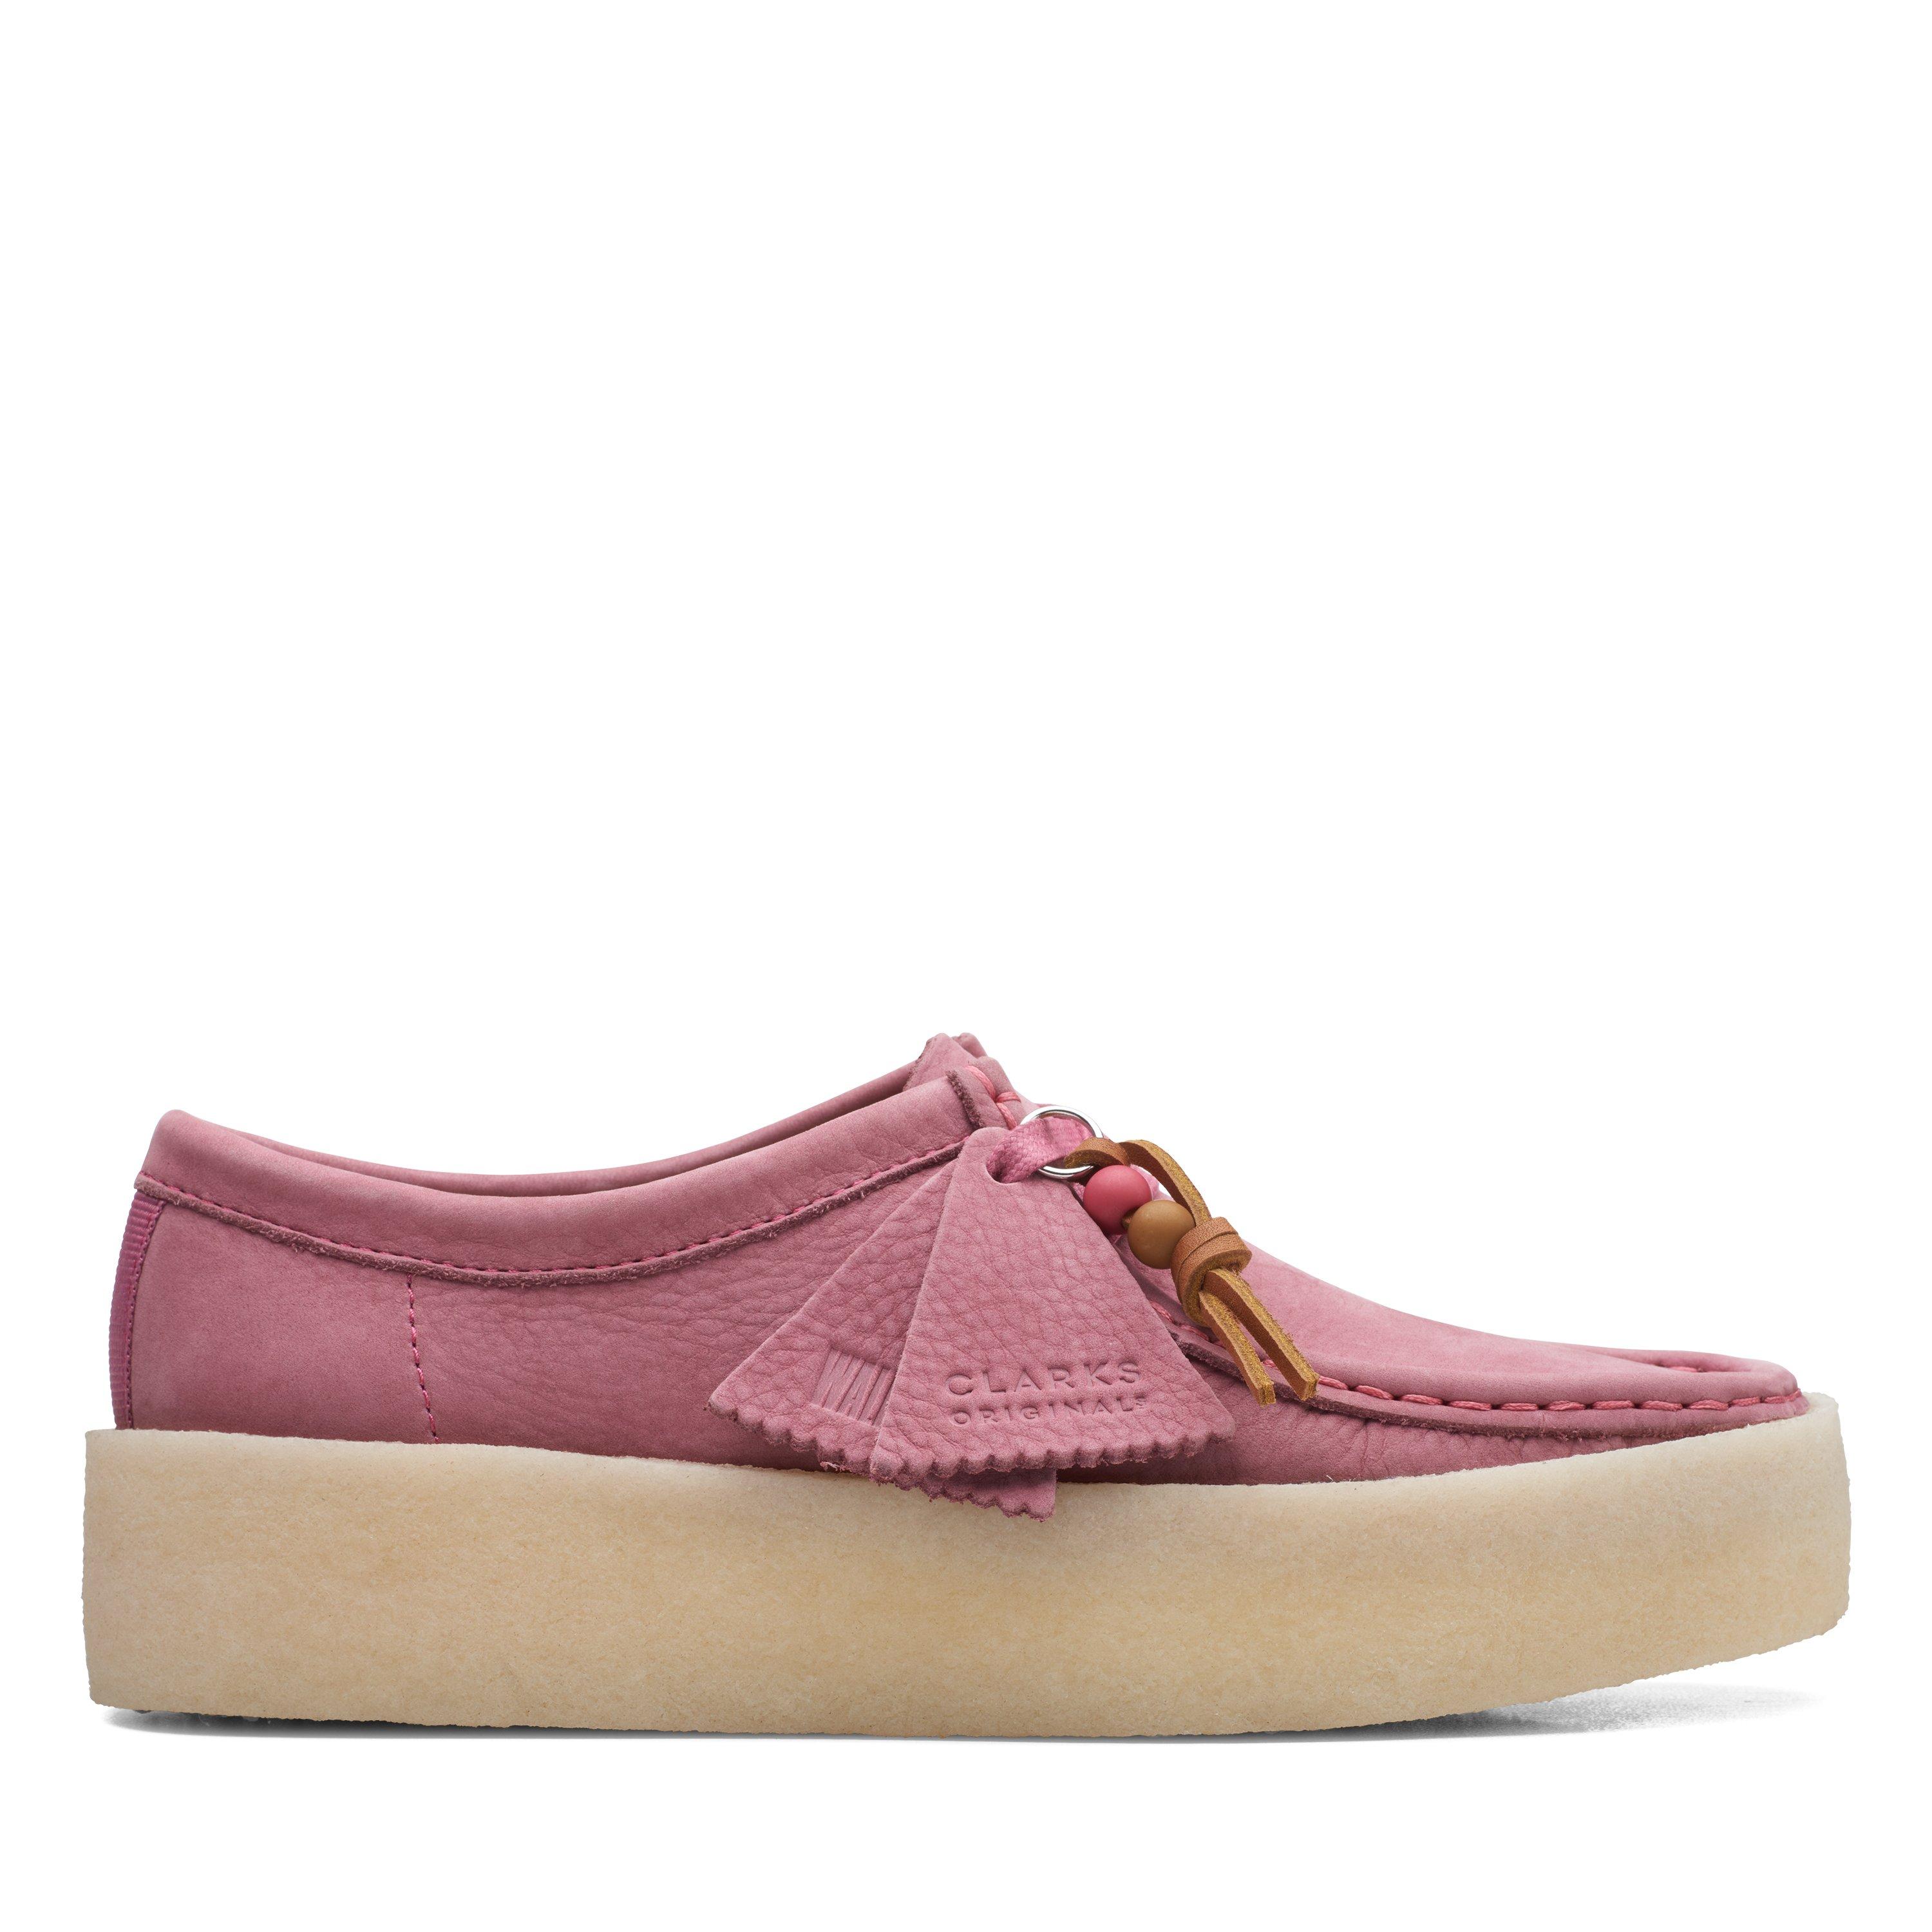 Clarks Originals Womens Wallabee Moccasin Cup Pink Leather Casual Shoes